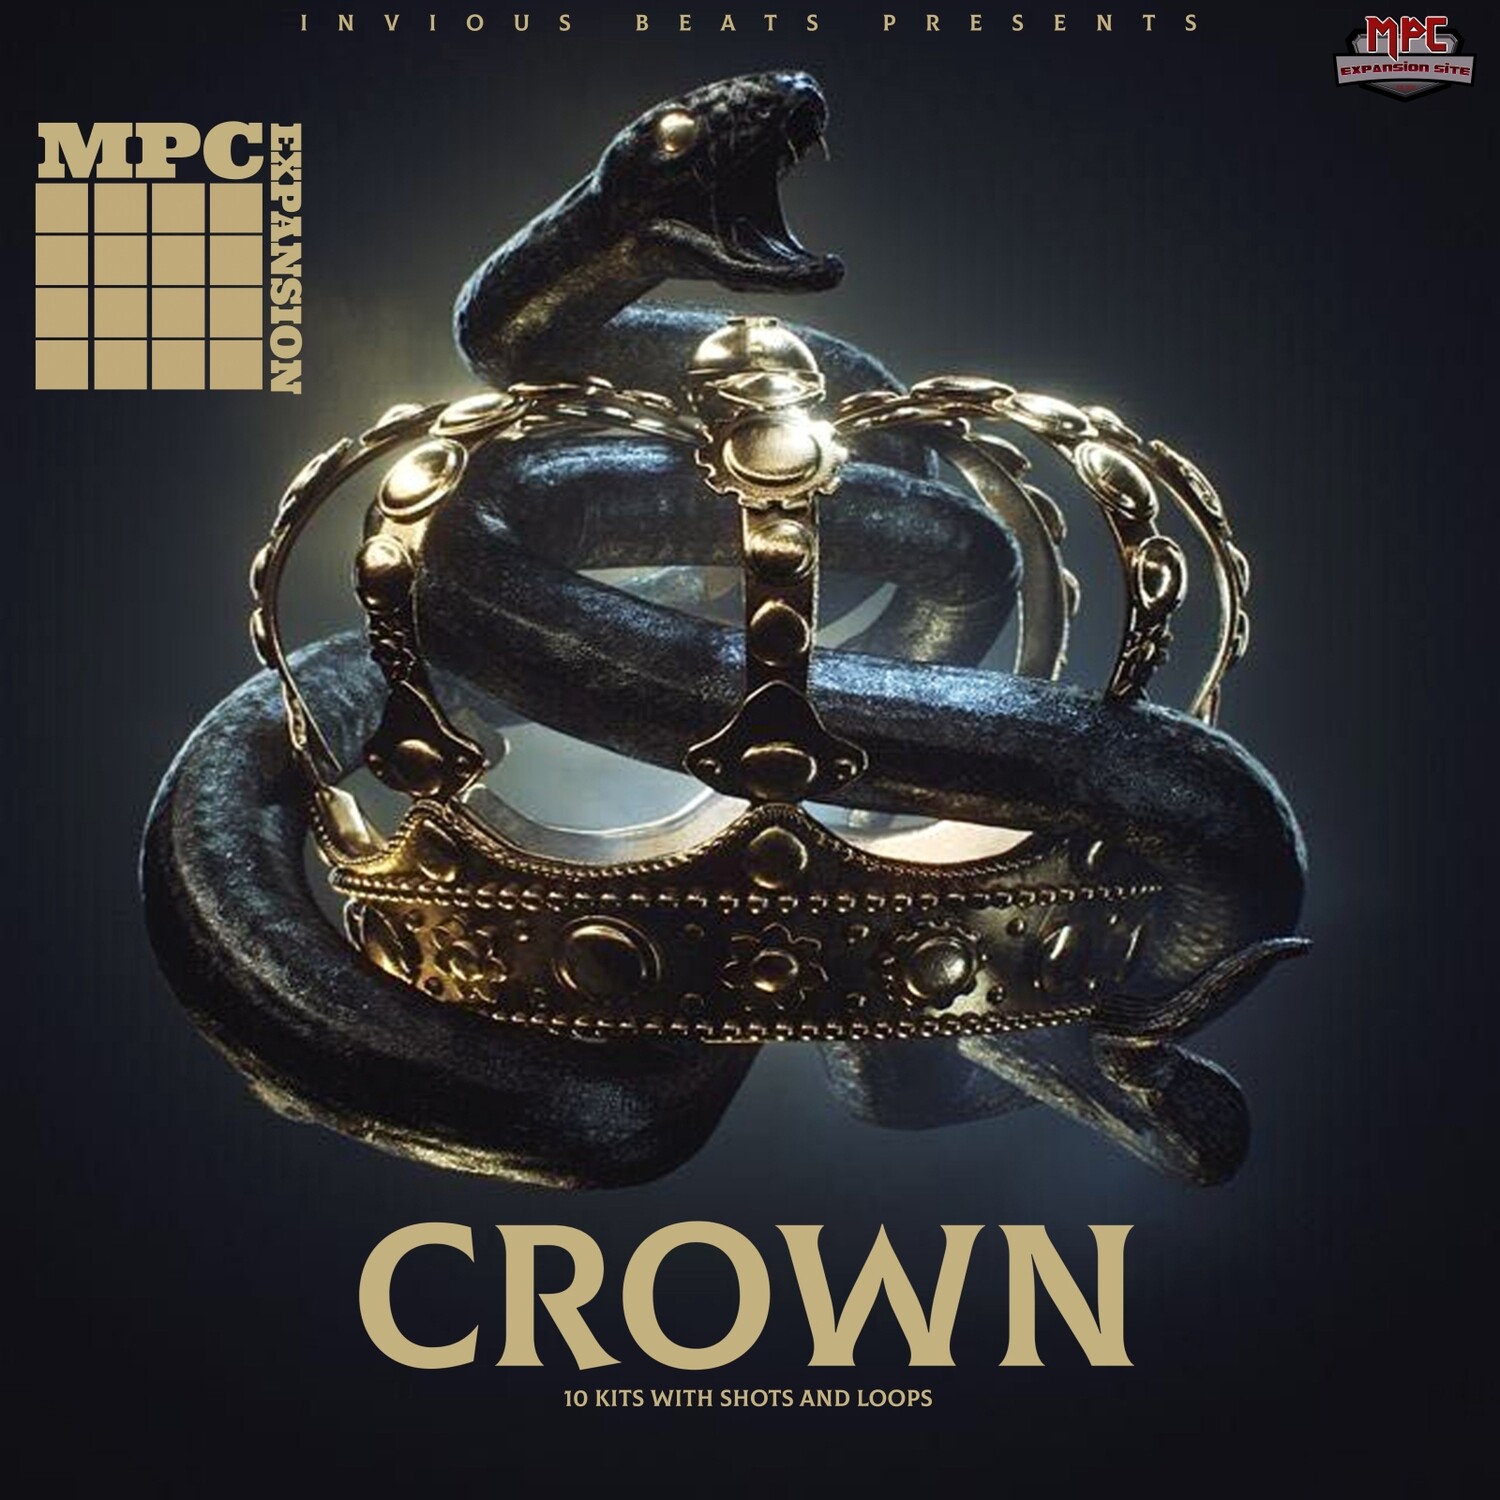 MPC EXPANSION 'CROWN' by INVIOUS